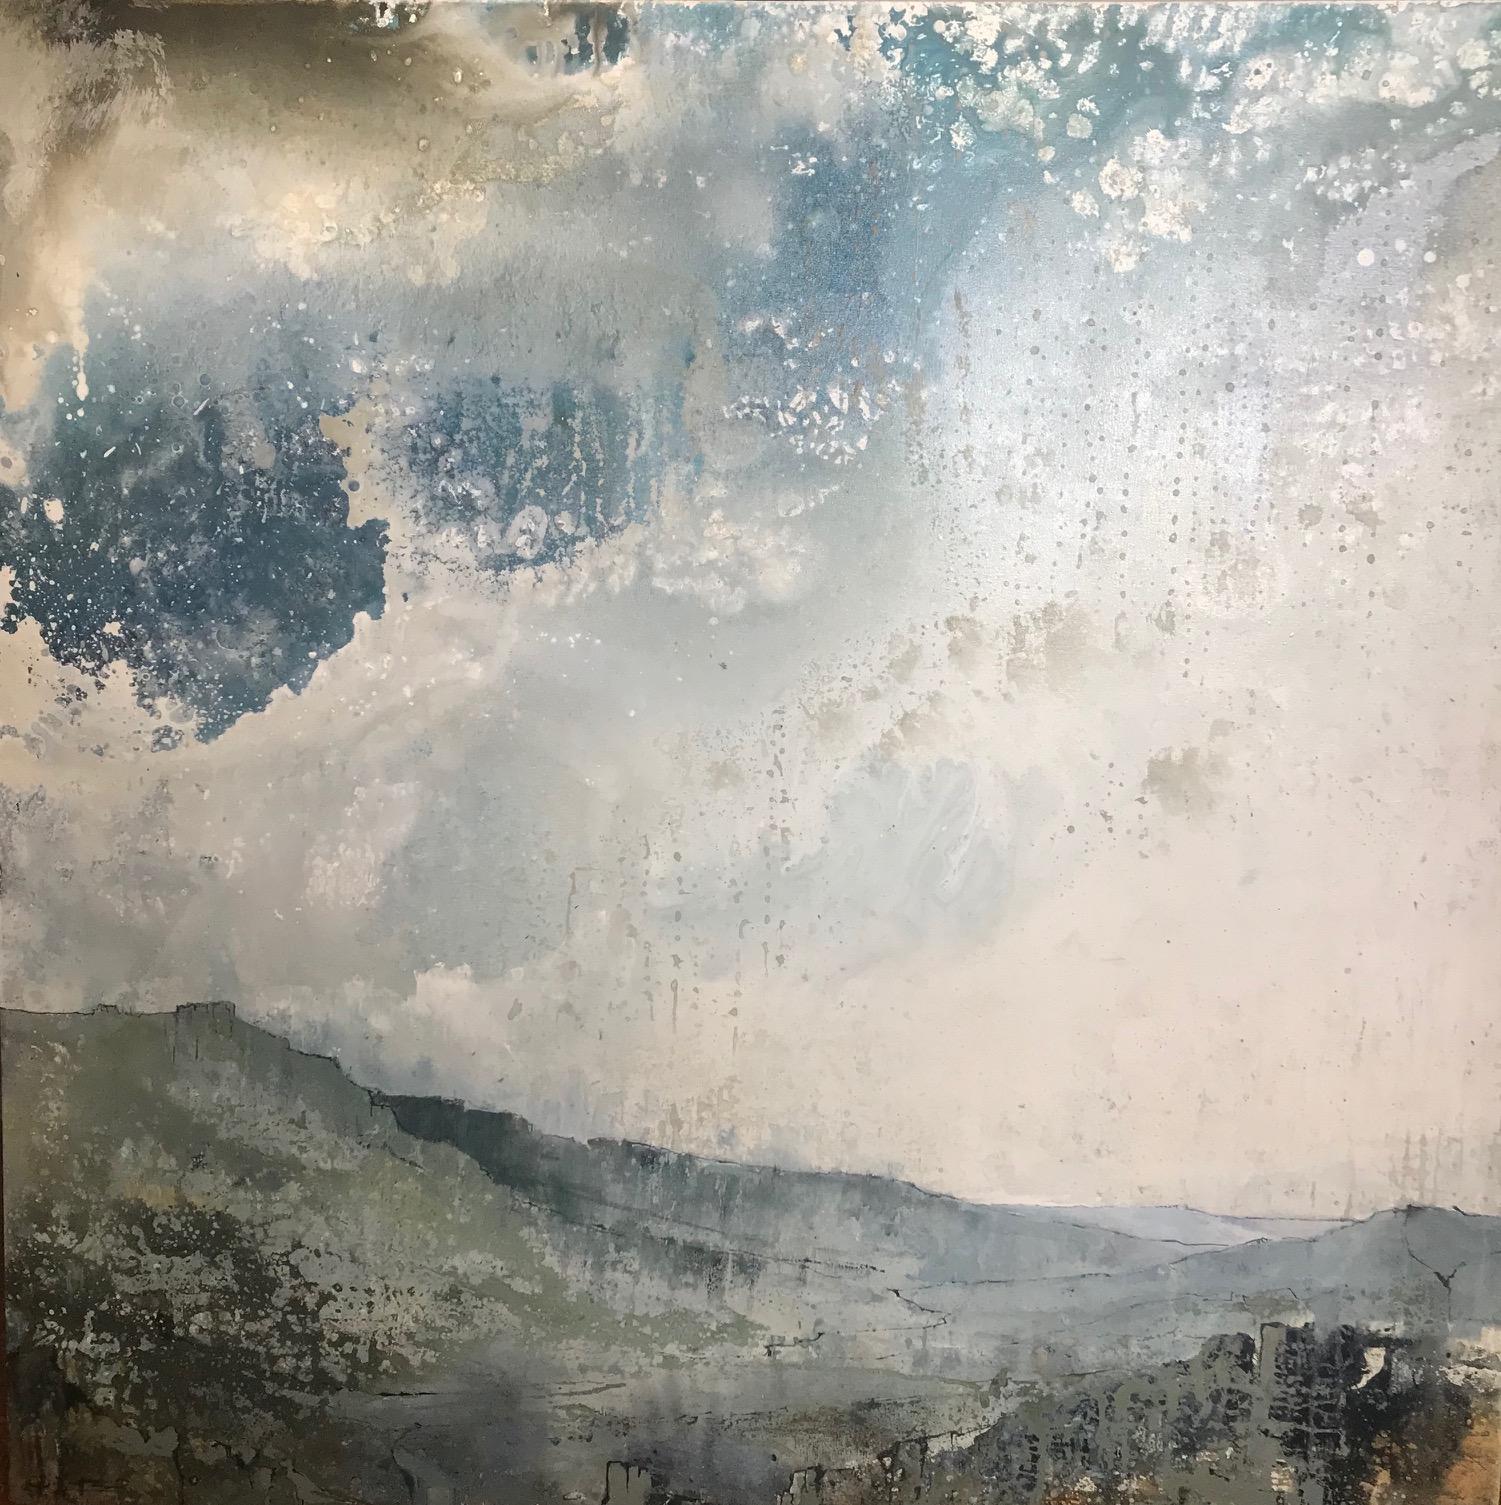 James Bonstow
Calmer Skies
Original Landscape Painting
Oil Paint on Canvas
Canvas Size: H 110cm x W 110cm x D 4cm
Sold Unframed
Please note that in situ images are purely an indication of how a piece may look.

Calmer Skies is an original painting